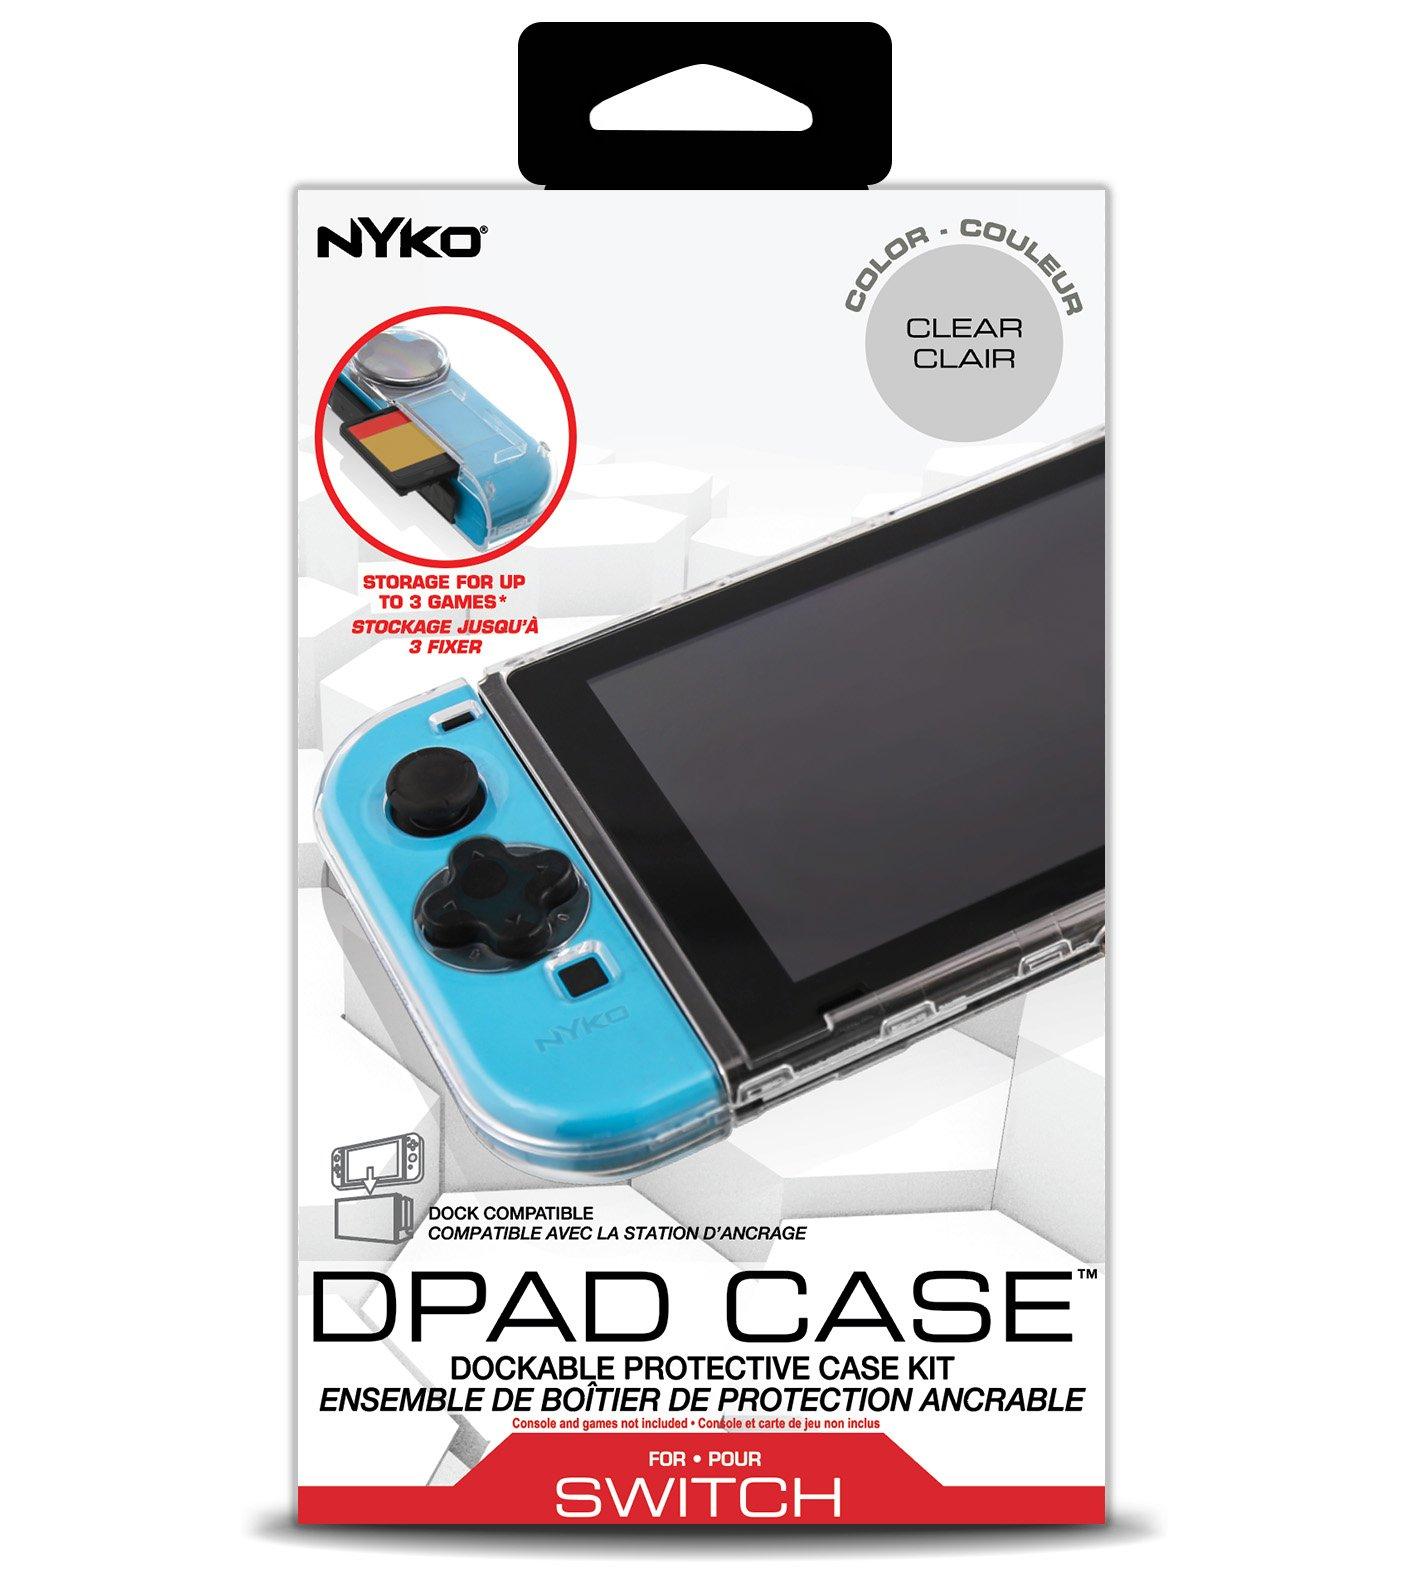 nyko thin case switch clear